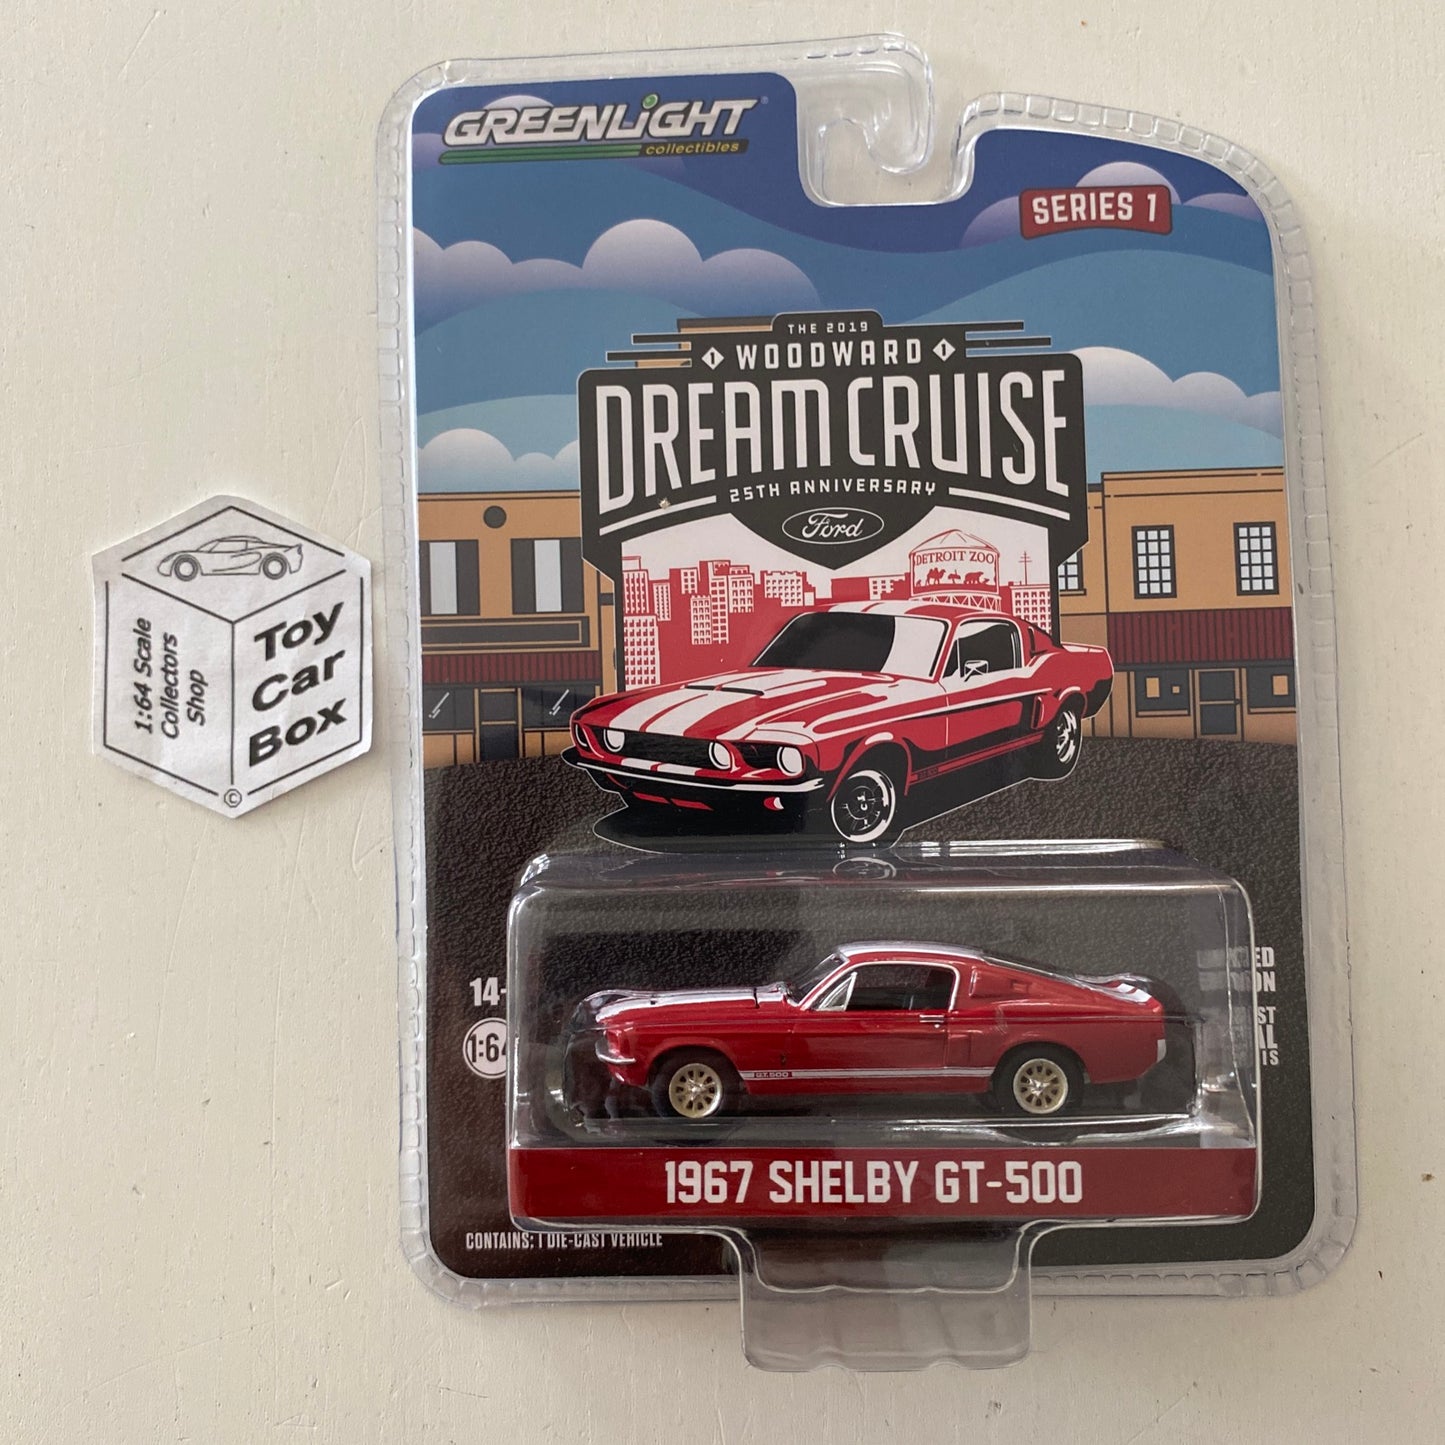 GREENLIGHT - 1967 Shelby Mustang GT-500 (Red 1:64 Woodward Dream Cruise S1) J95